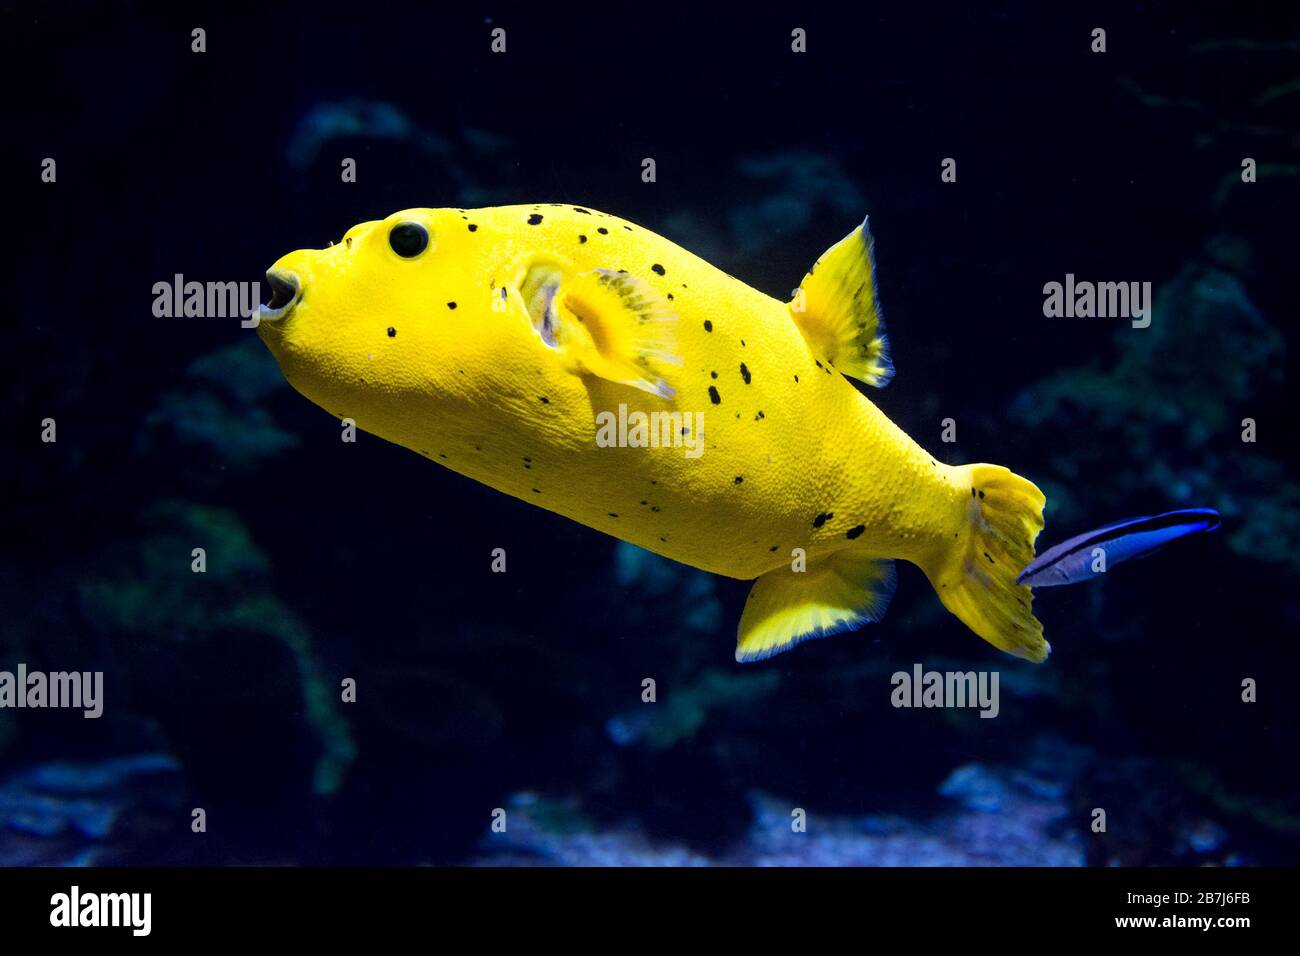 The blackspotted puffer (Arothron nigropunctatus). The dog-faced puffer fish, is a tropical marine fish belonging to the family Tetraodontidae. Stock Photo